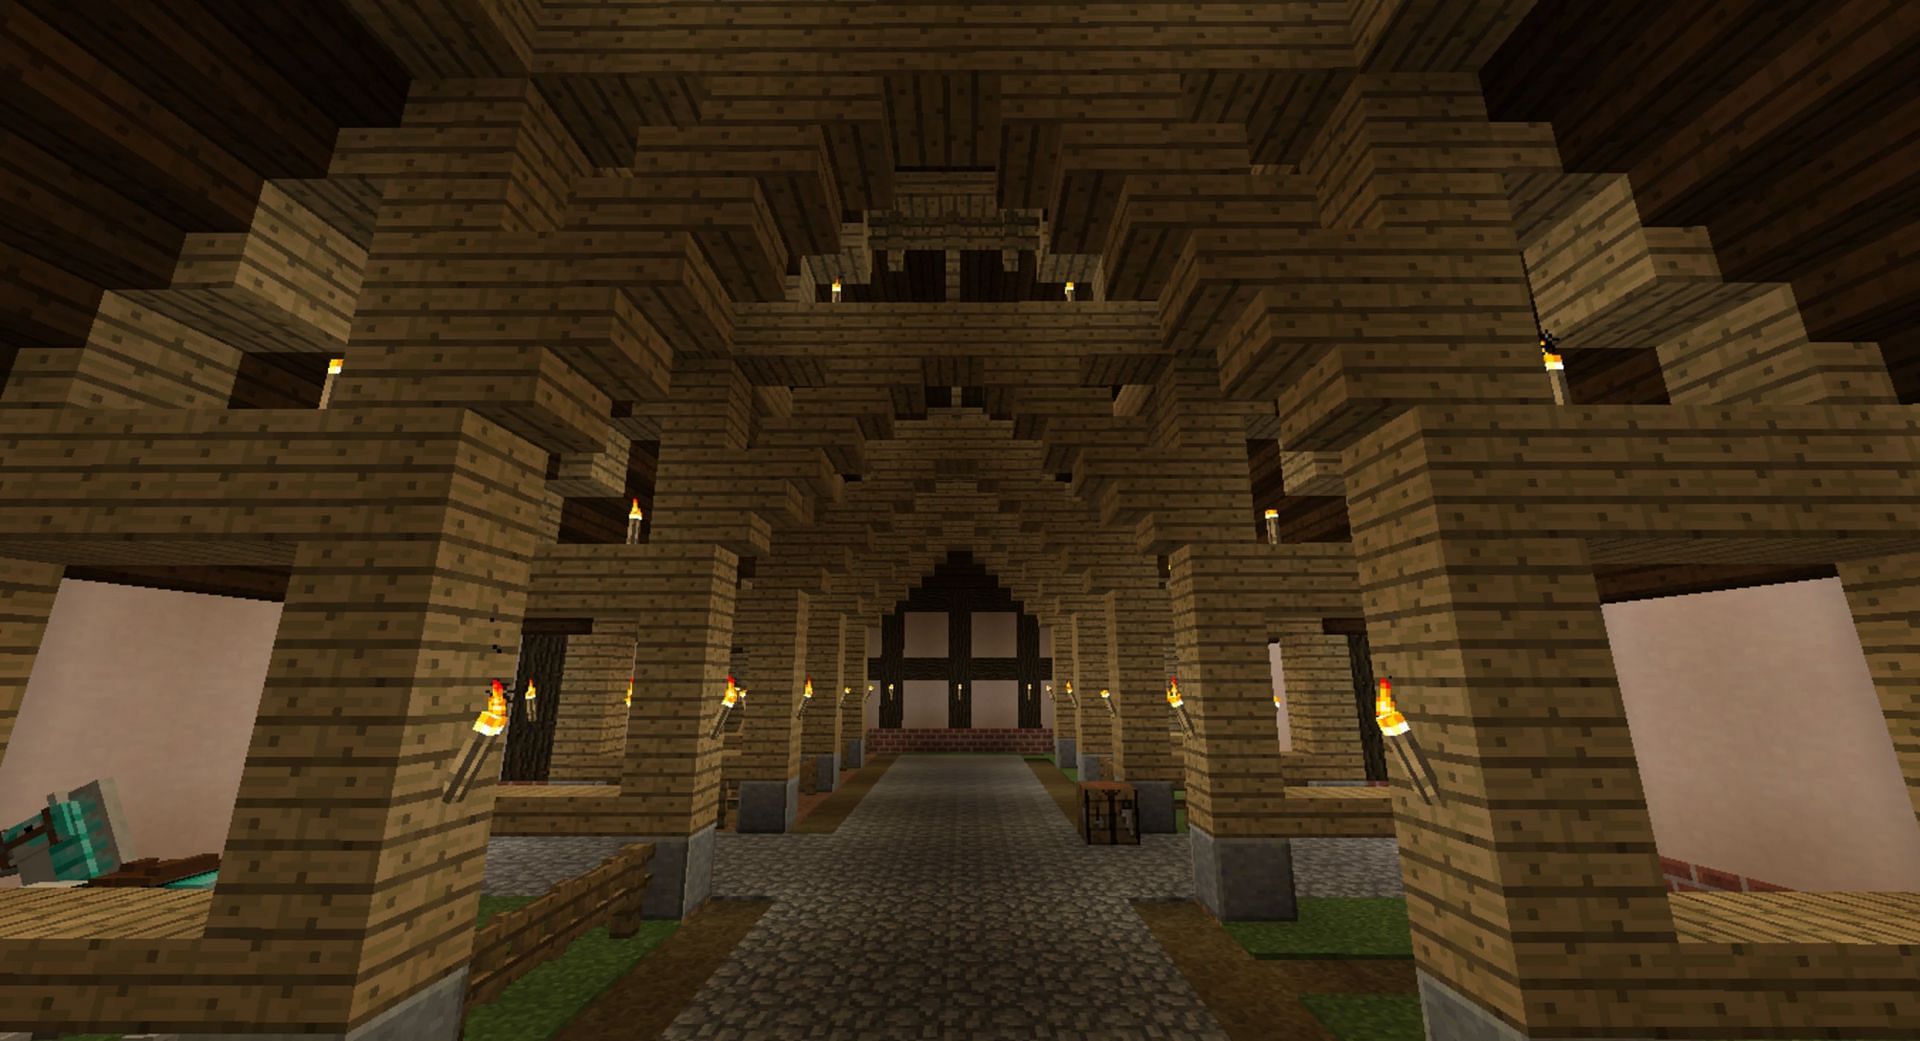 This build was inspired by medieval constructs originally built by the Britons (Image via MinecraftRamblings/WordPress)